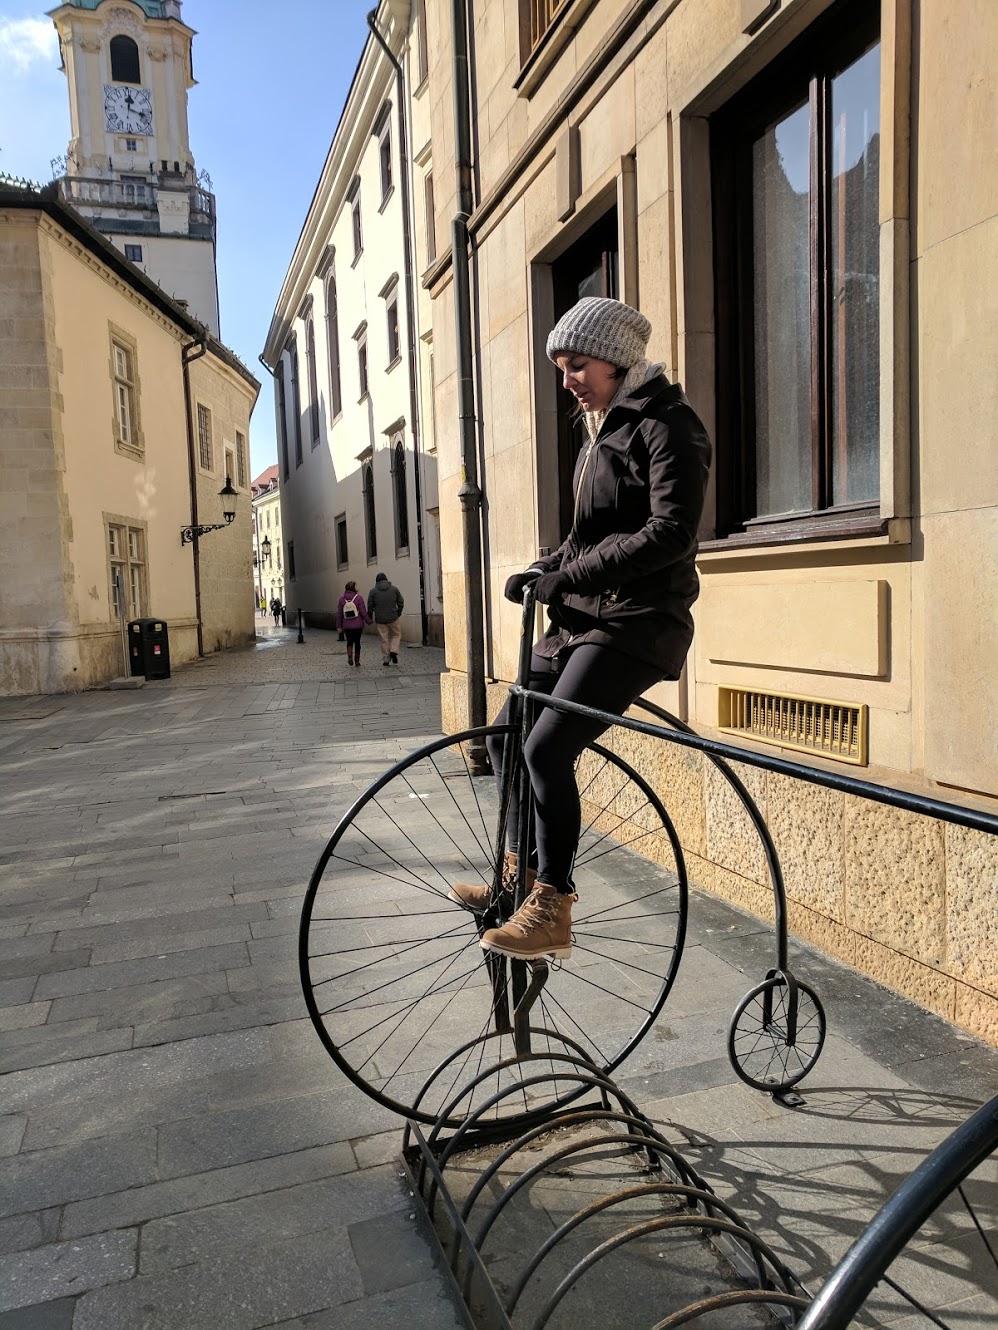 Bicycle located in front of the Primate's Palace